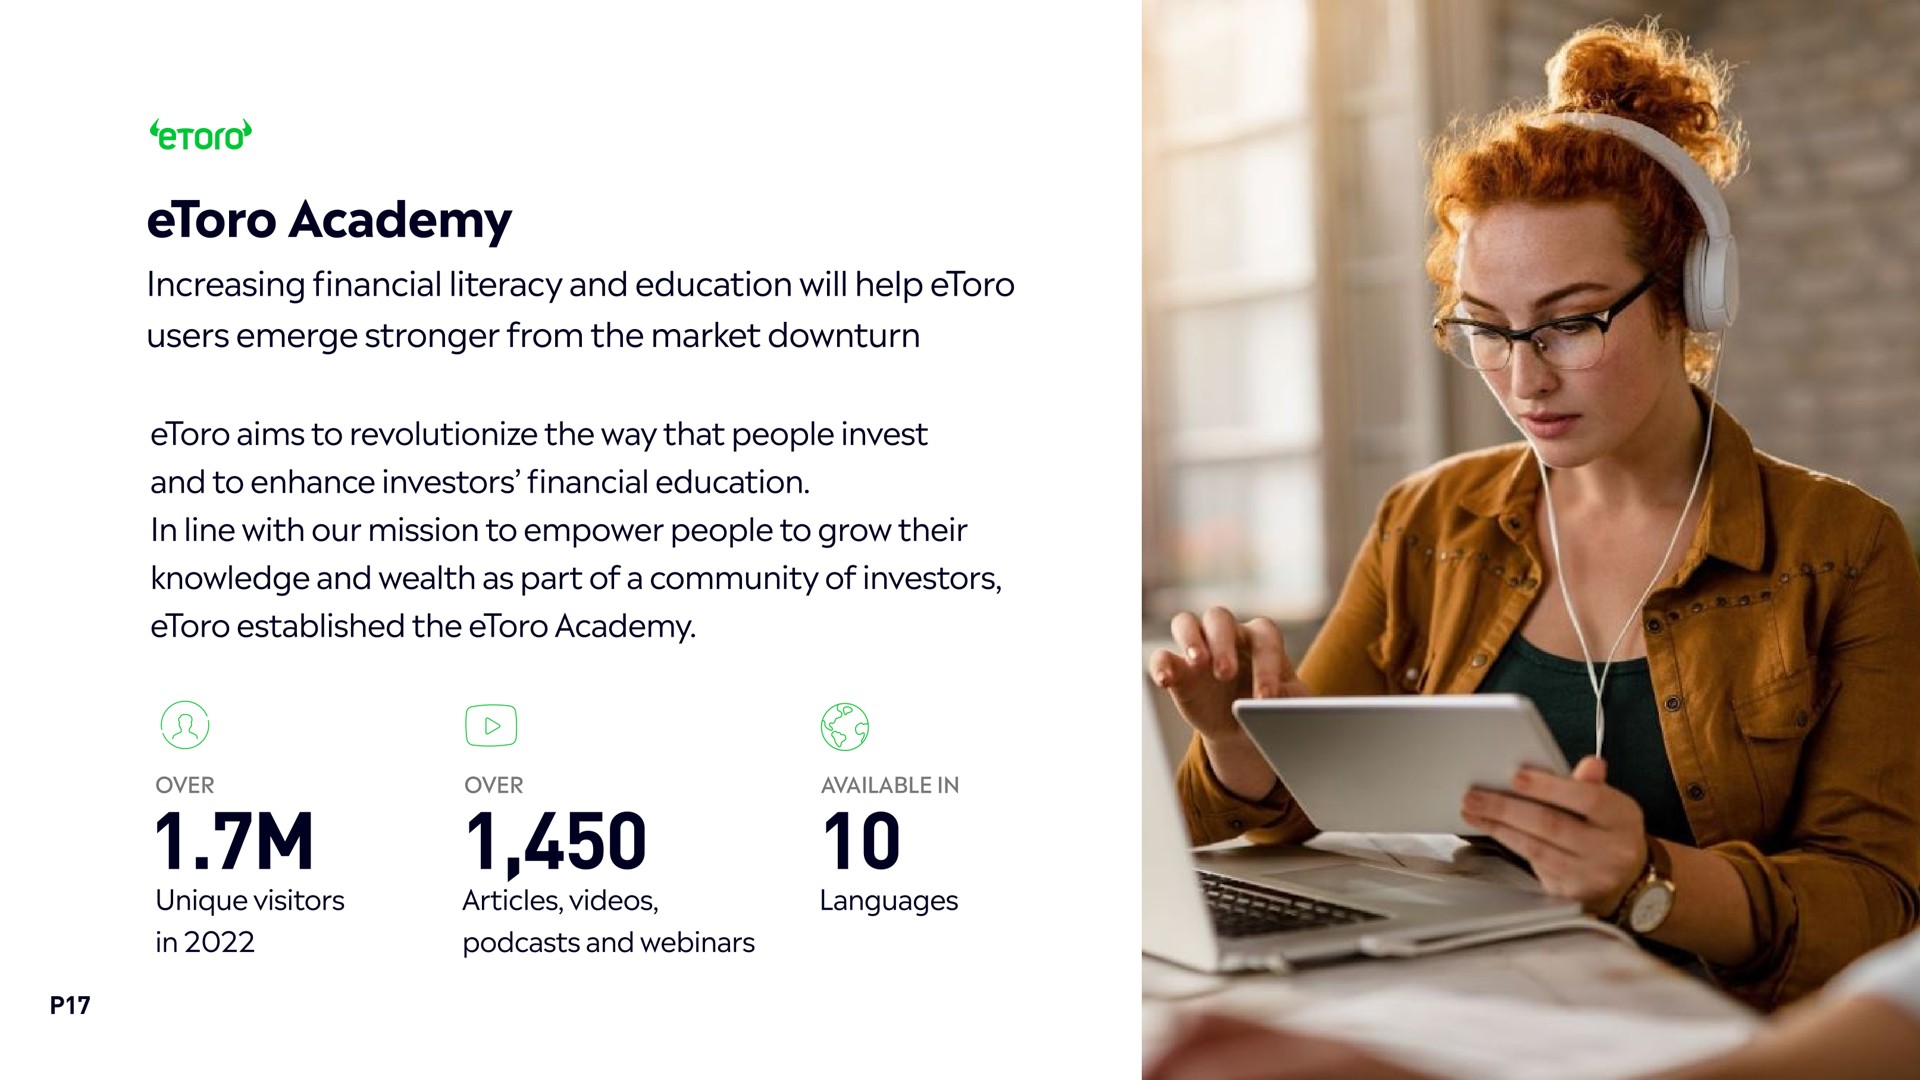 academy increasing financial literacy and education will help users emerge from the market downturn | eToro